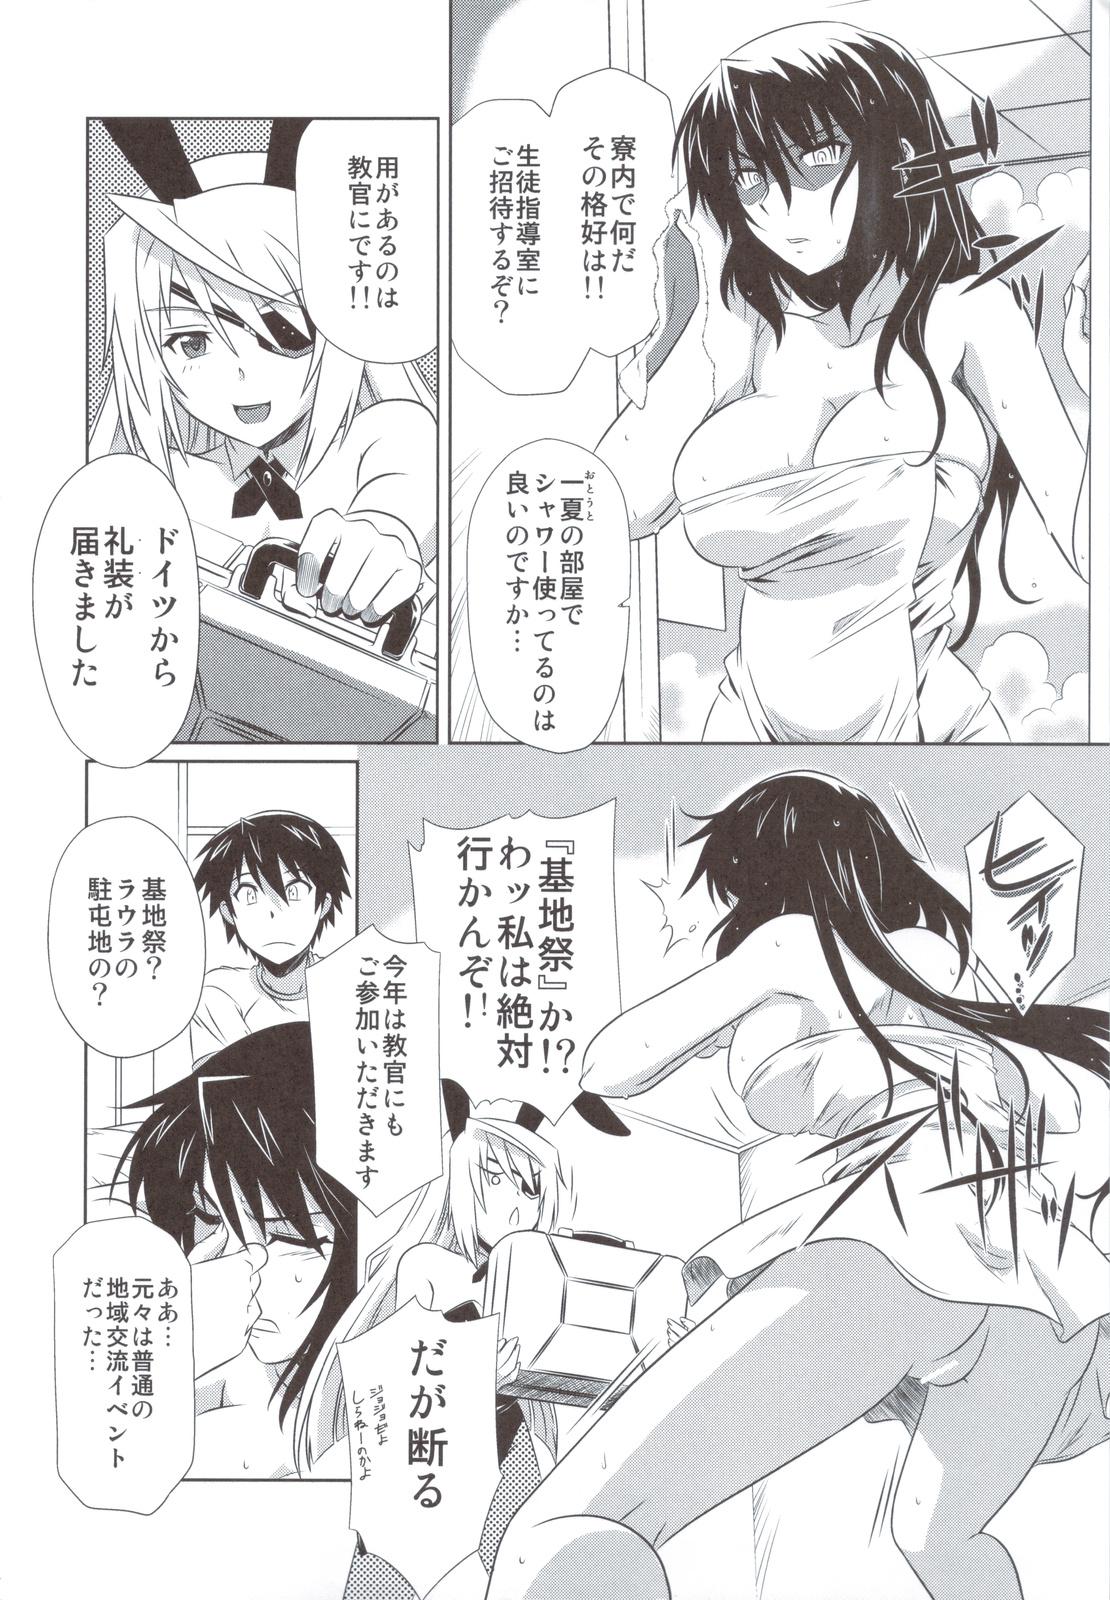 Jap is Incest Strategy 3 - Infinite stratos Cfnm - Page 3